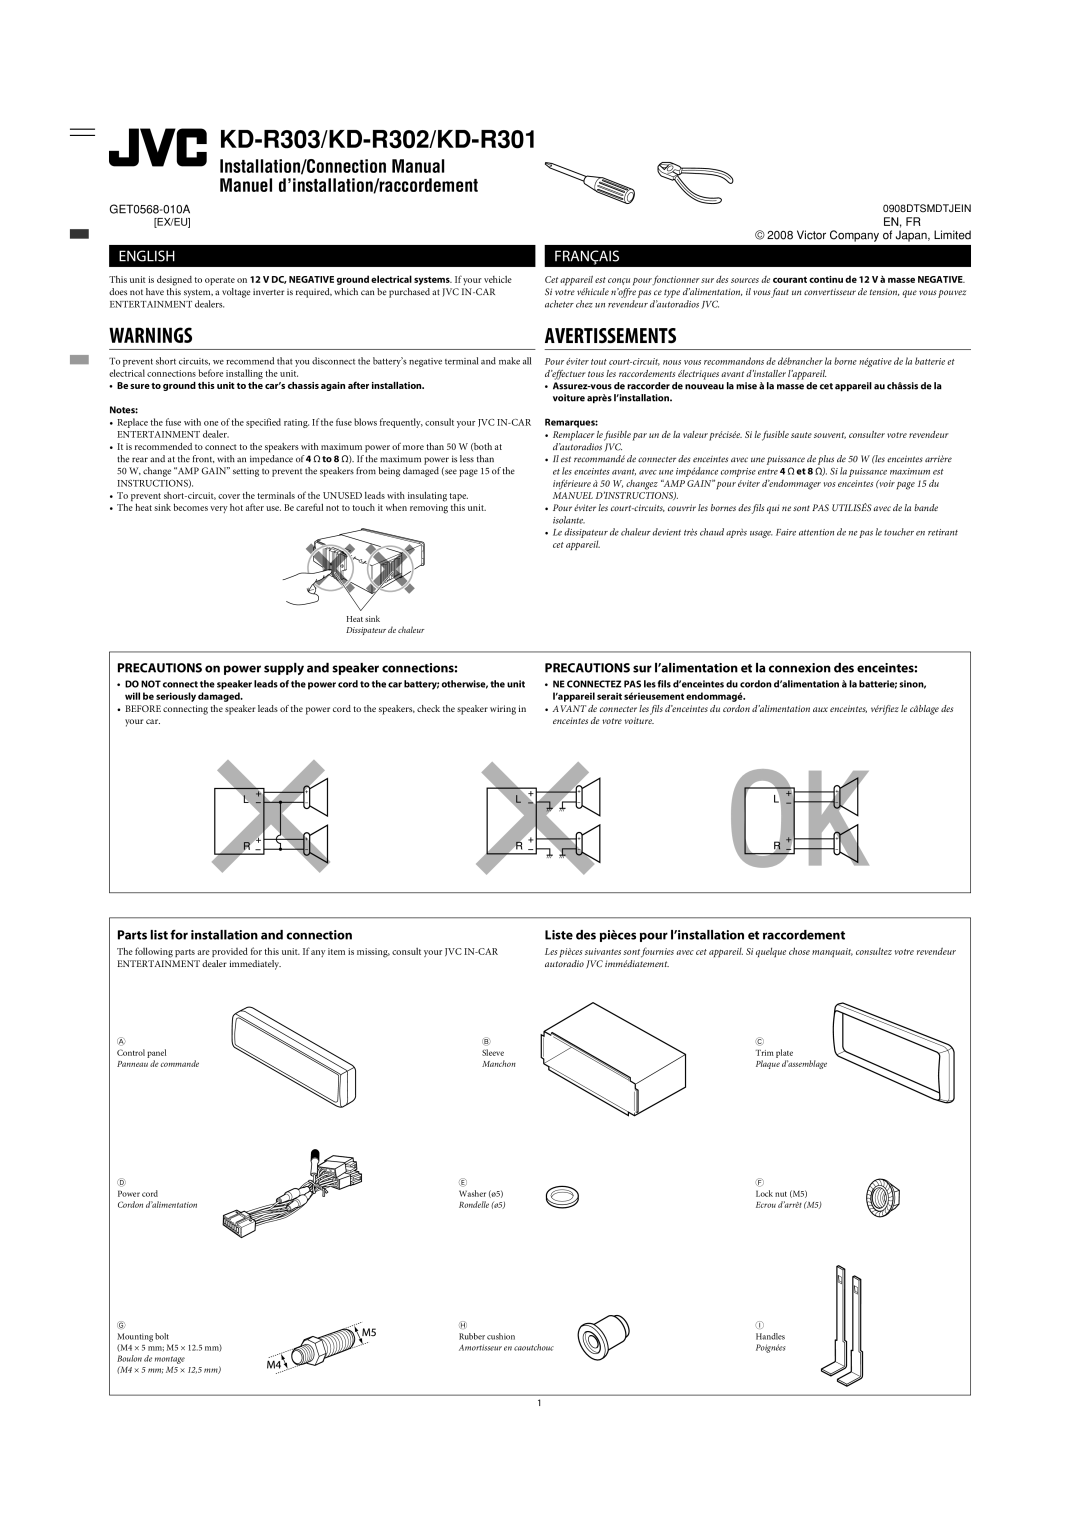 JVC KD-R303/KD-R302/KD-R301, Warnings, Avertissements, English, Français, Parts list for installation and connection 